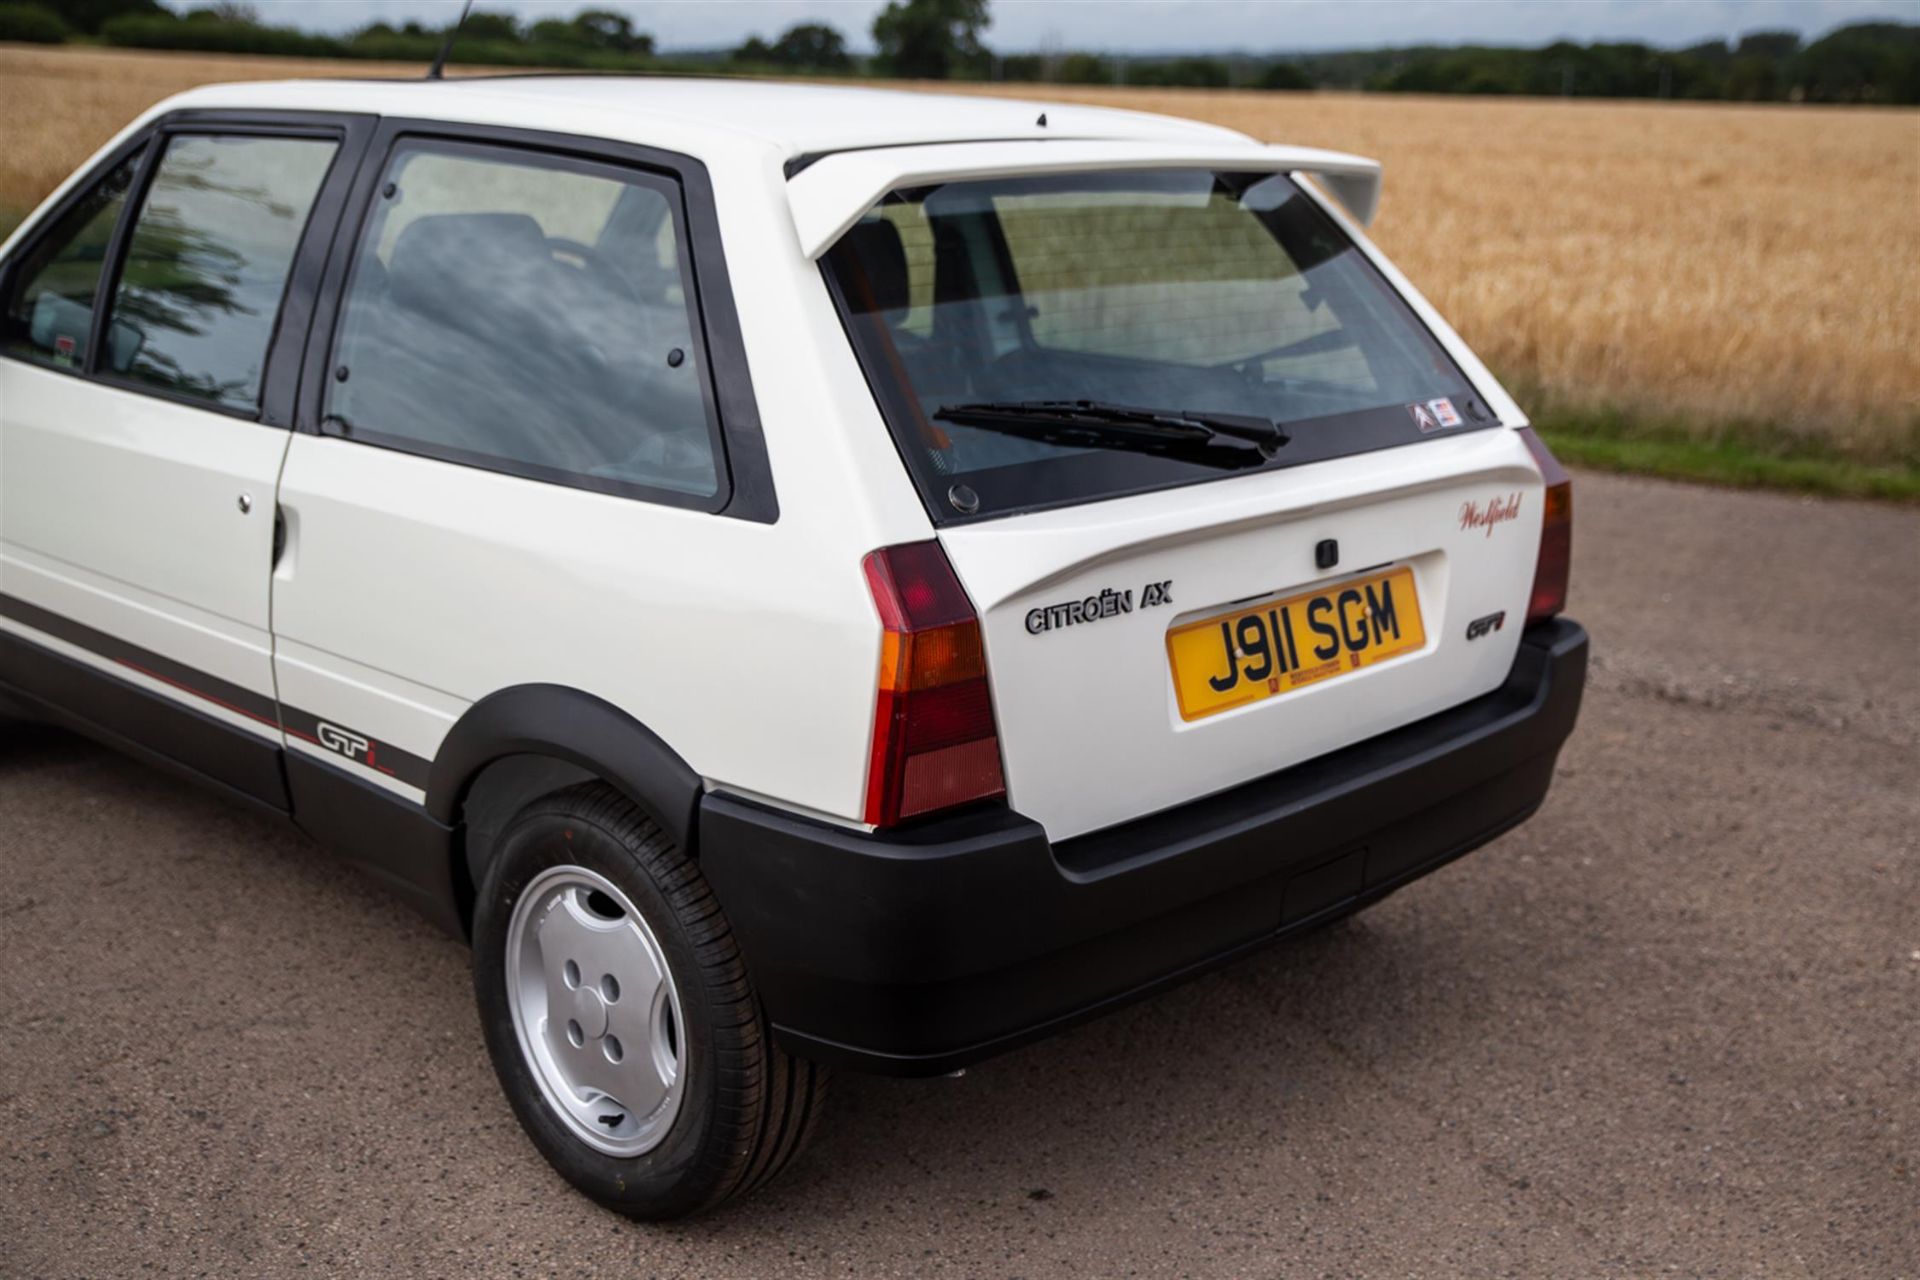 1991 Citroën AX GTi - 15,967 miles from new - Image 10 of 10